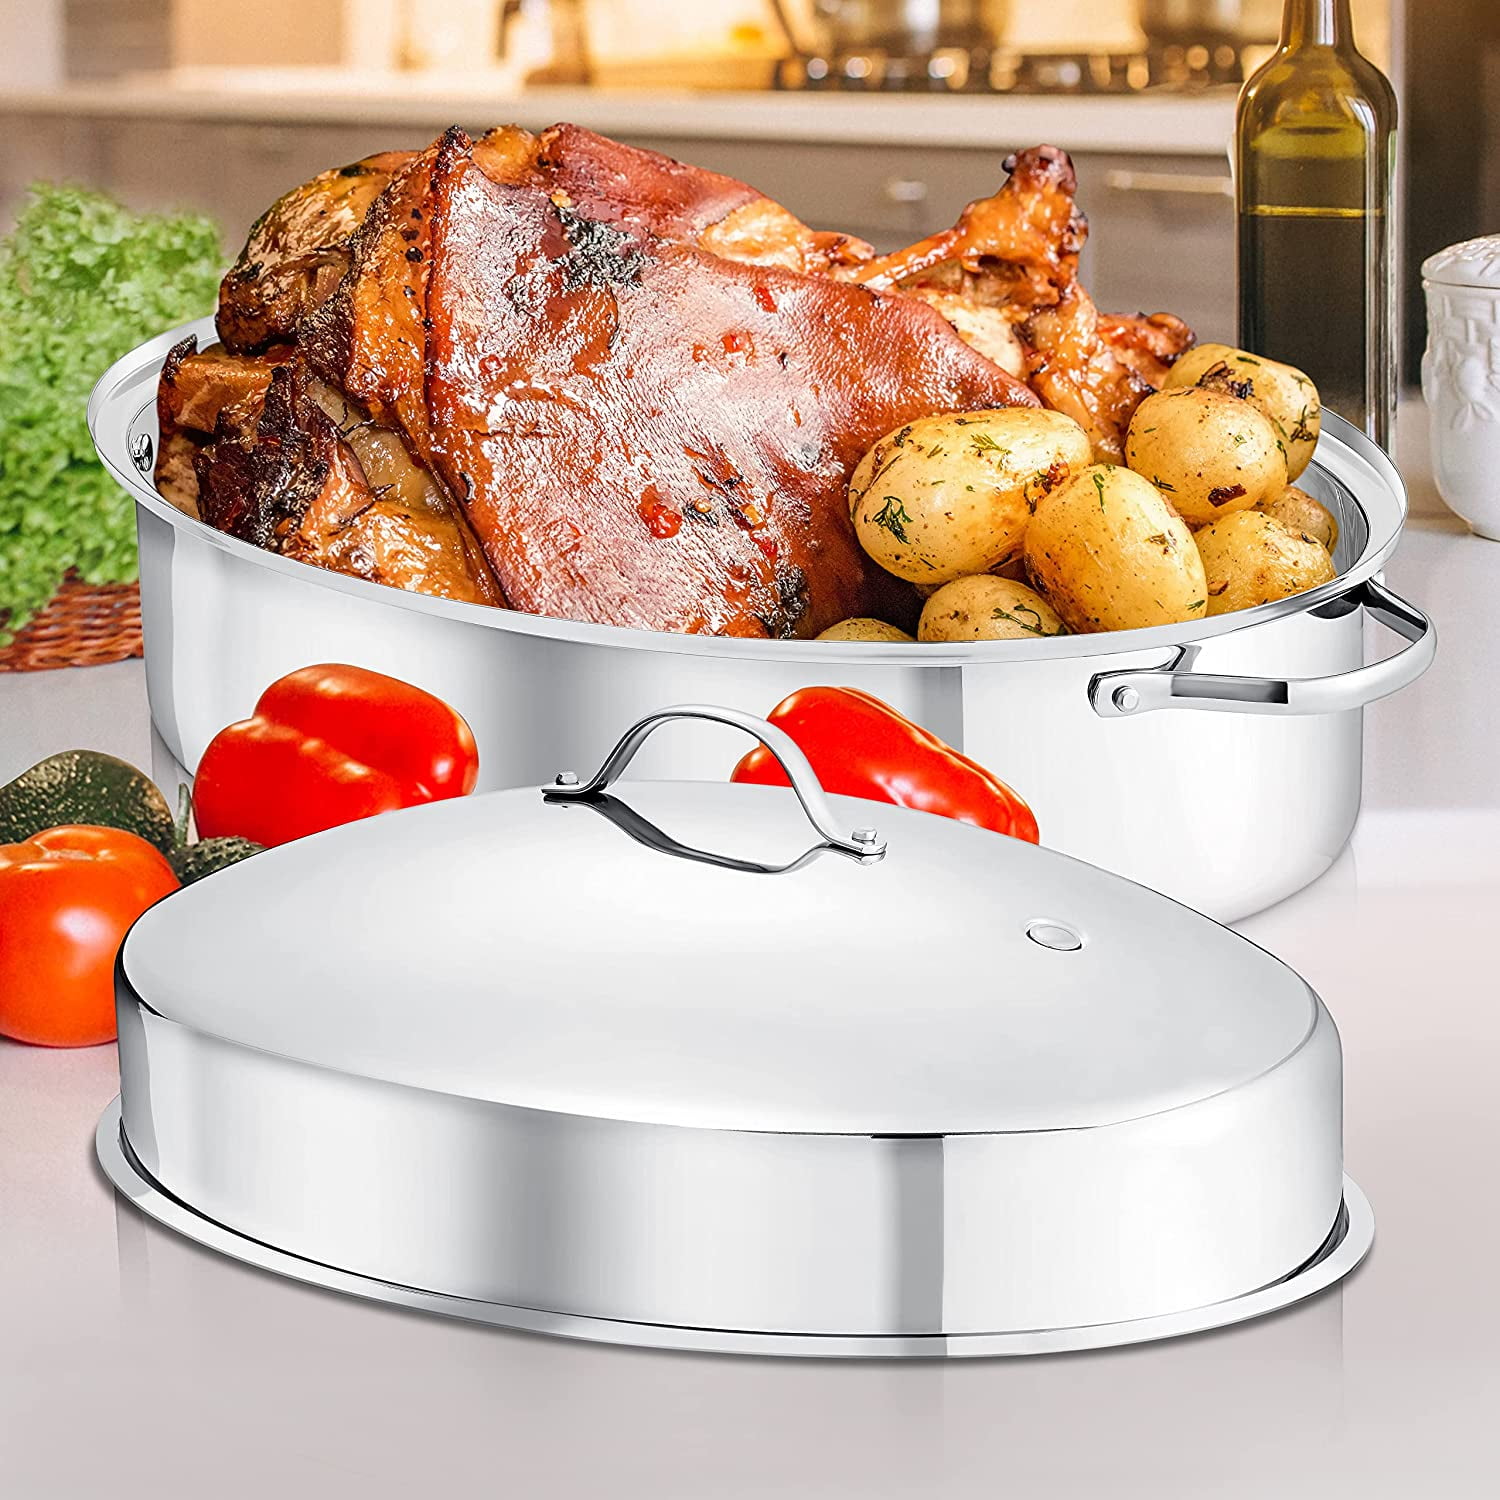 Nutrichef Roaster with Polished Rack and Wire Handle 